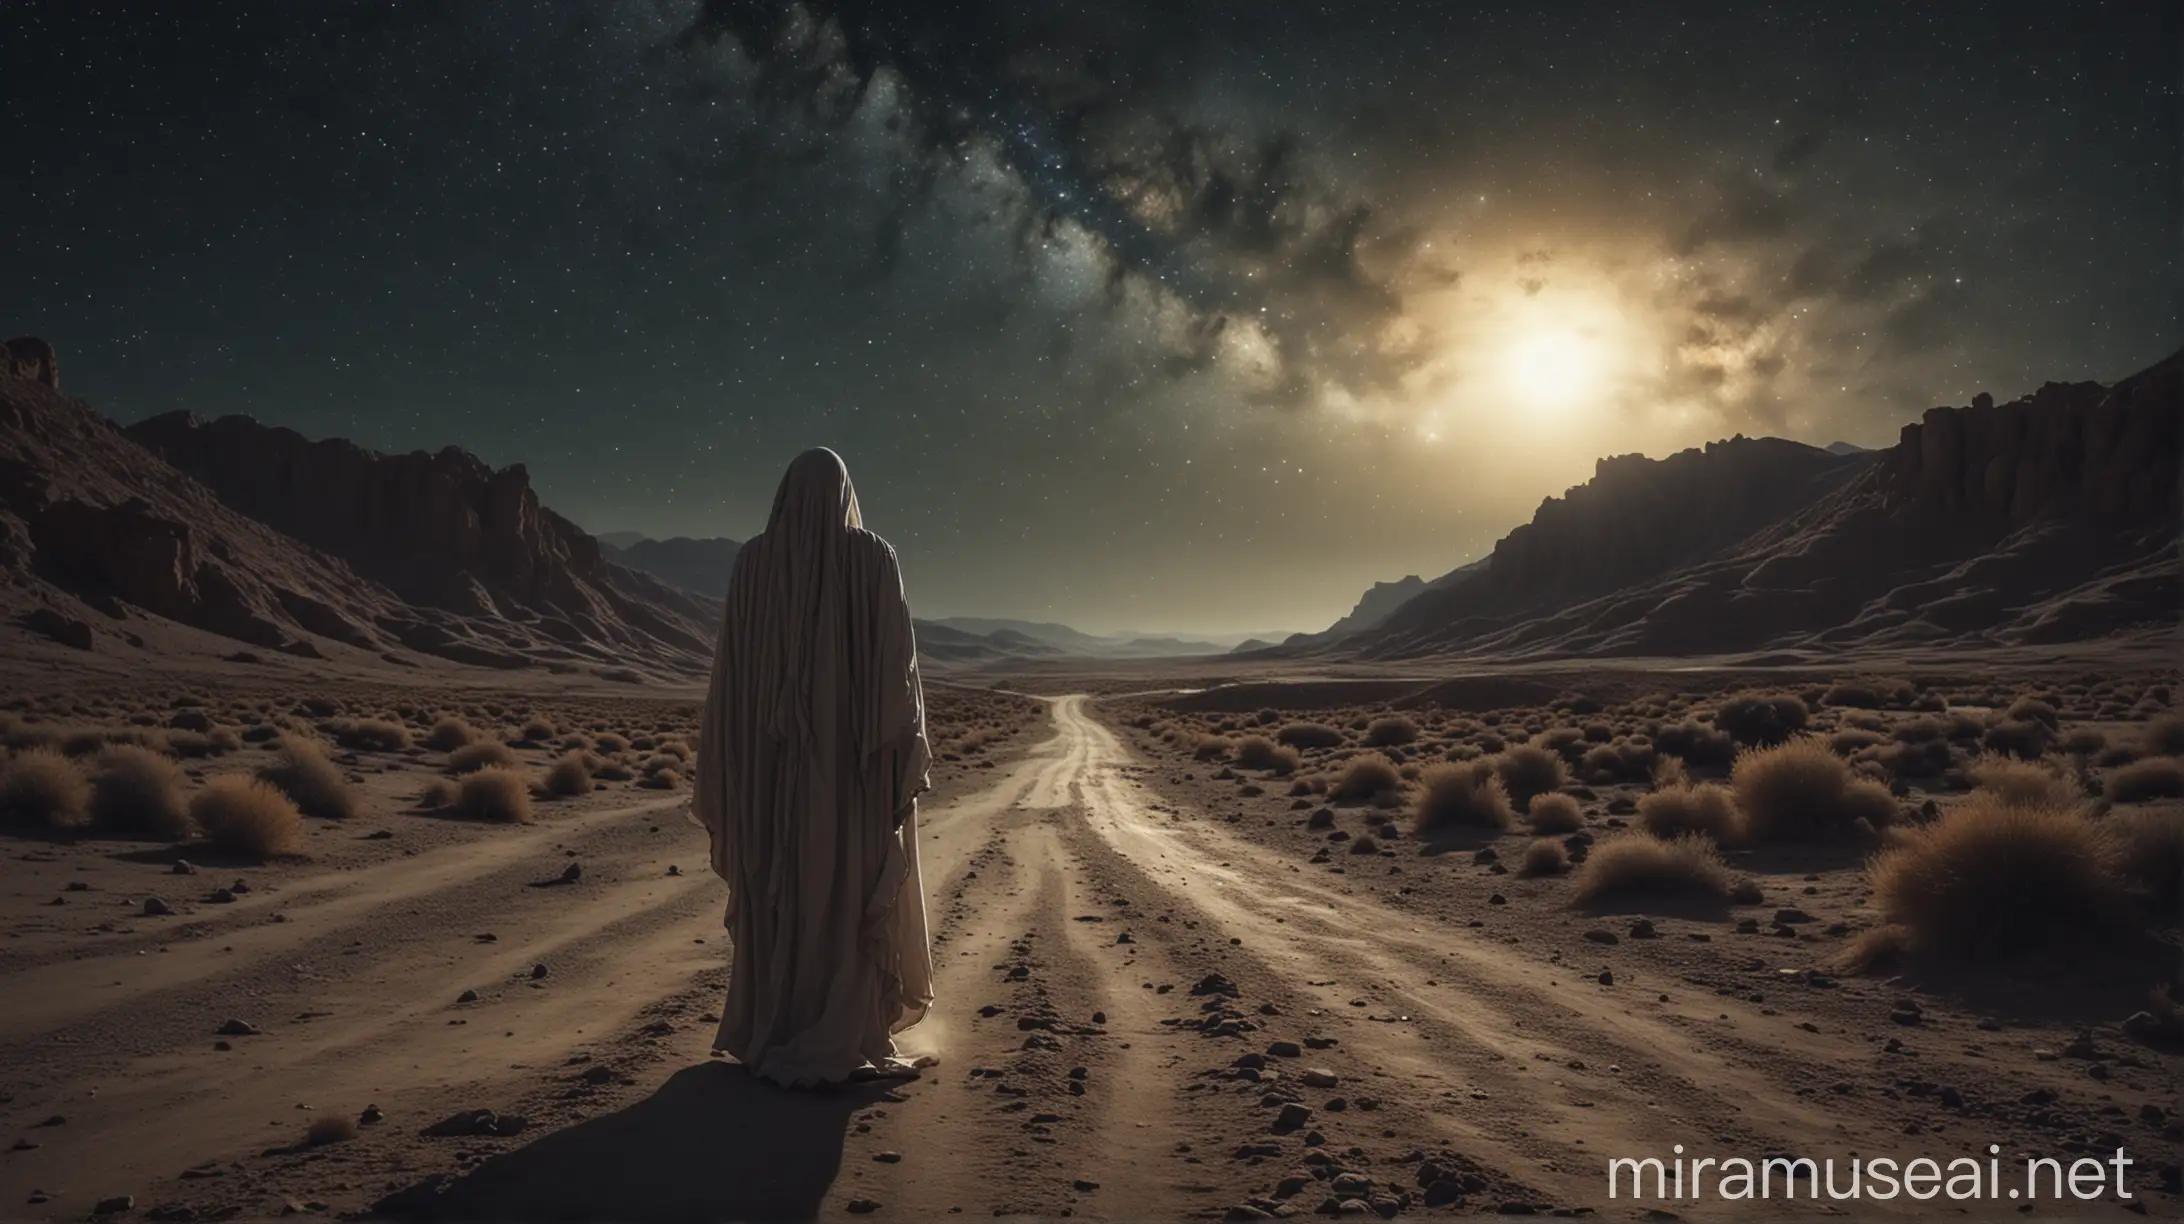 ghost in iran, in the scary night, real image, with details, 8k, sky, Old texture in the desert